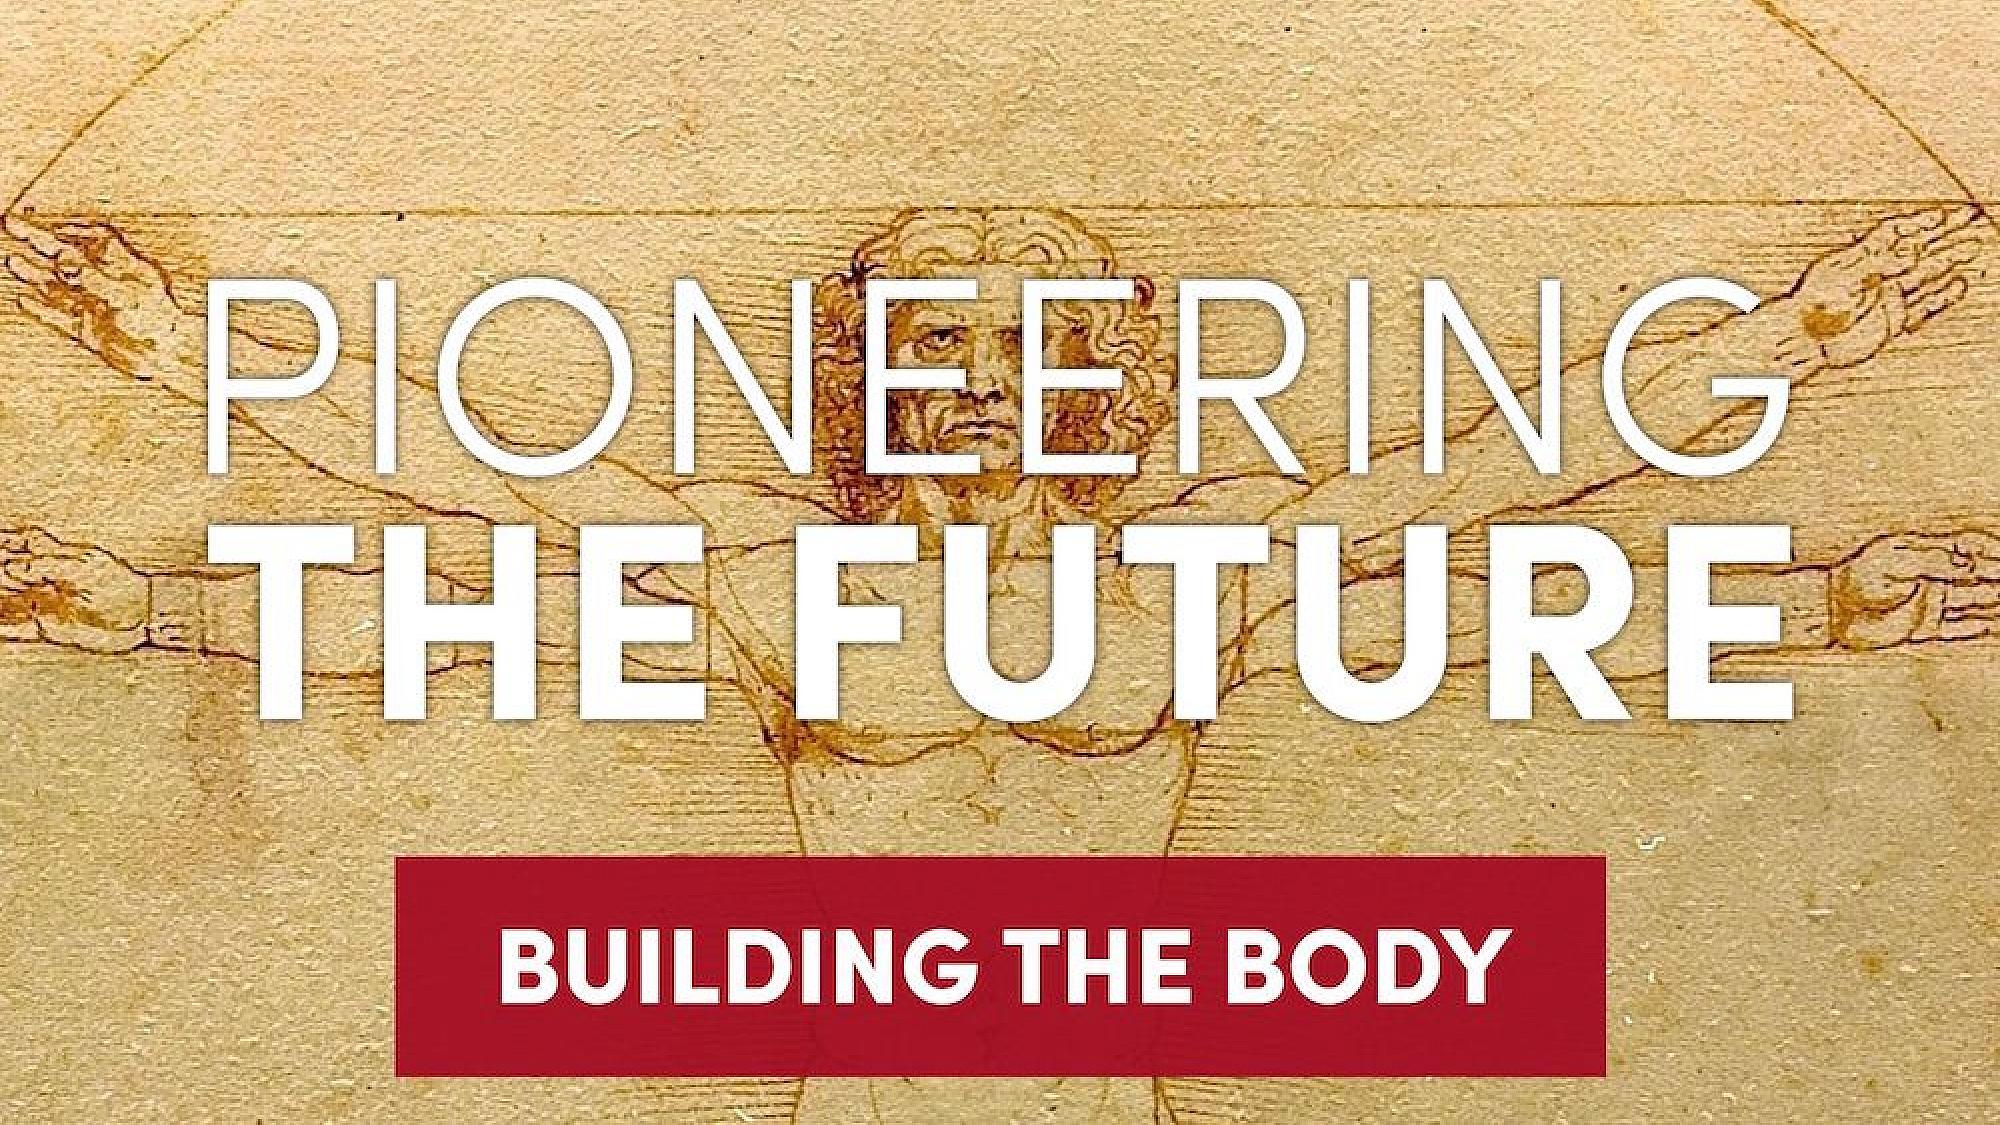 Pioneering the Future: Building the Body